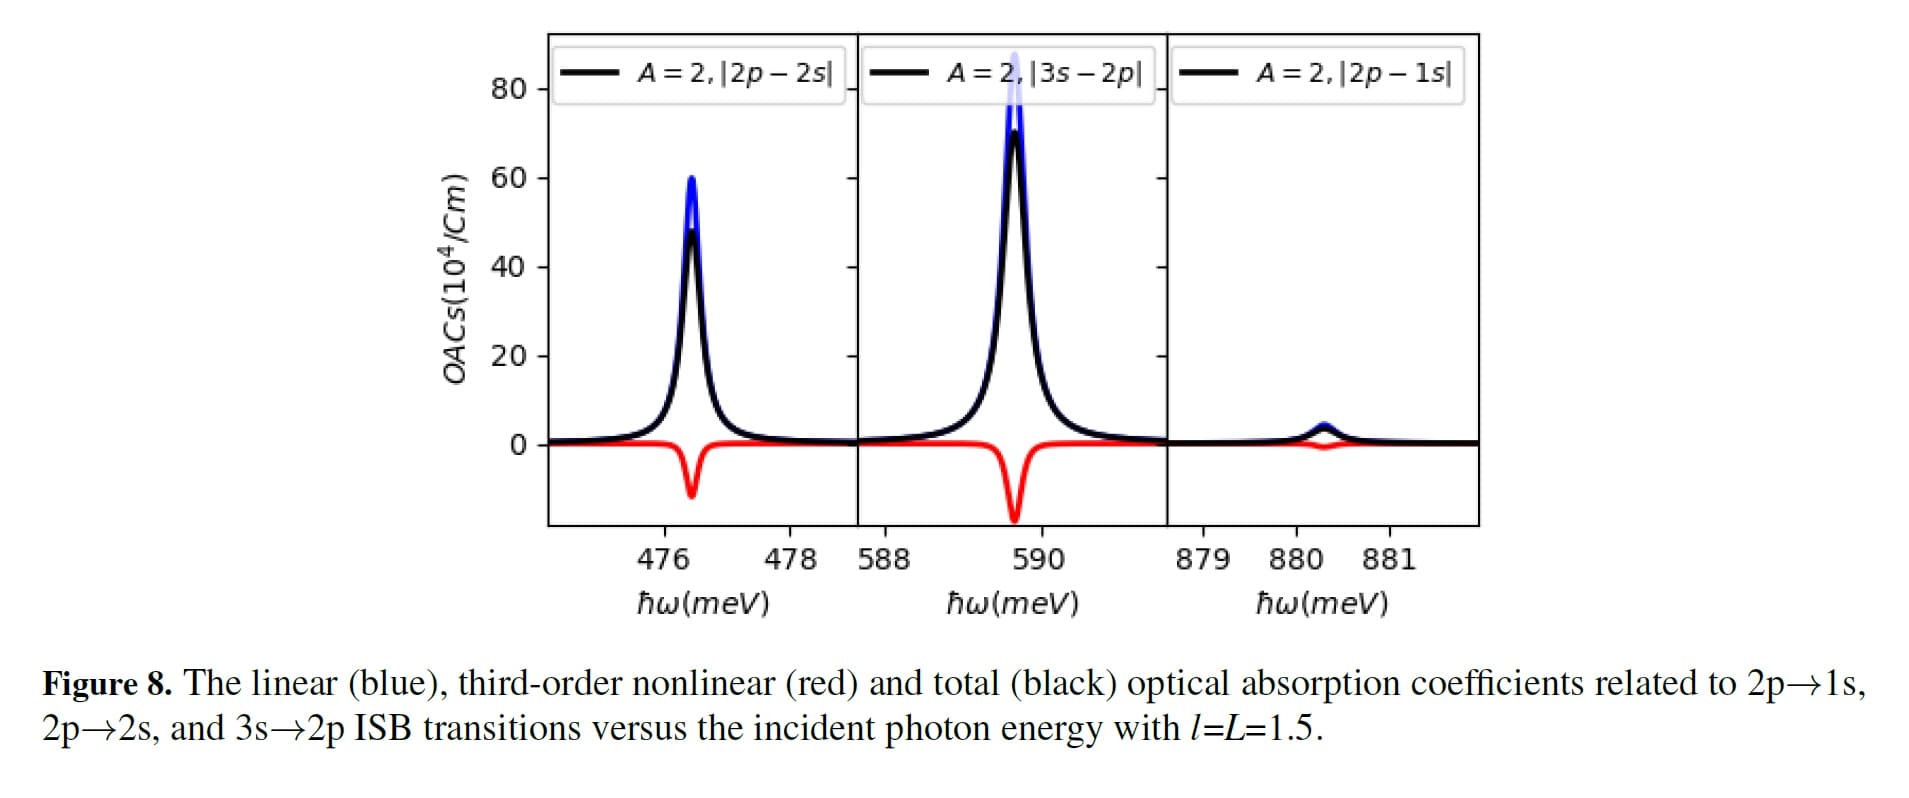 Theoretical study of ISB conduction optical absorption and impurity binding energy associated with lowest excited states in QW with a new modulated potential